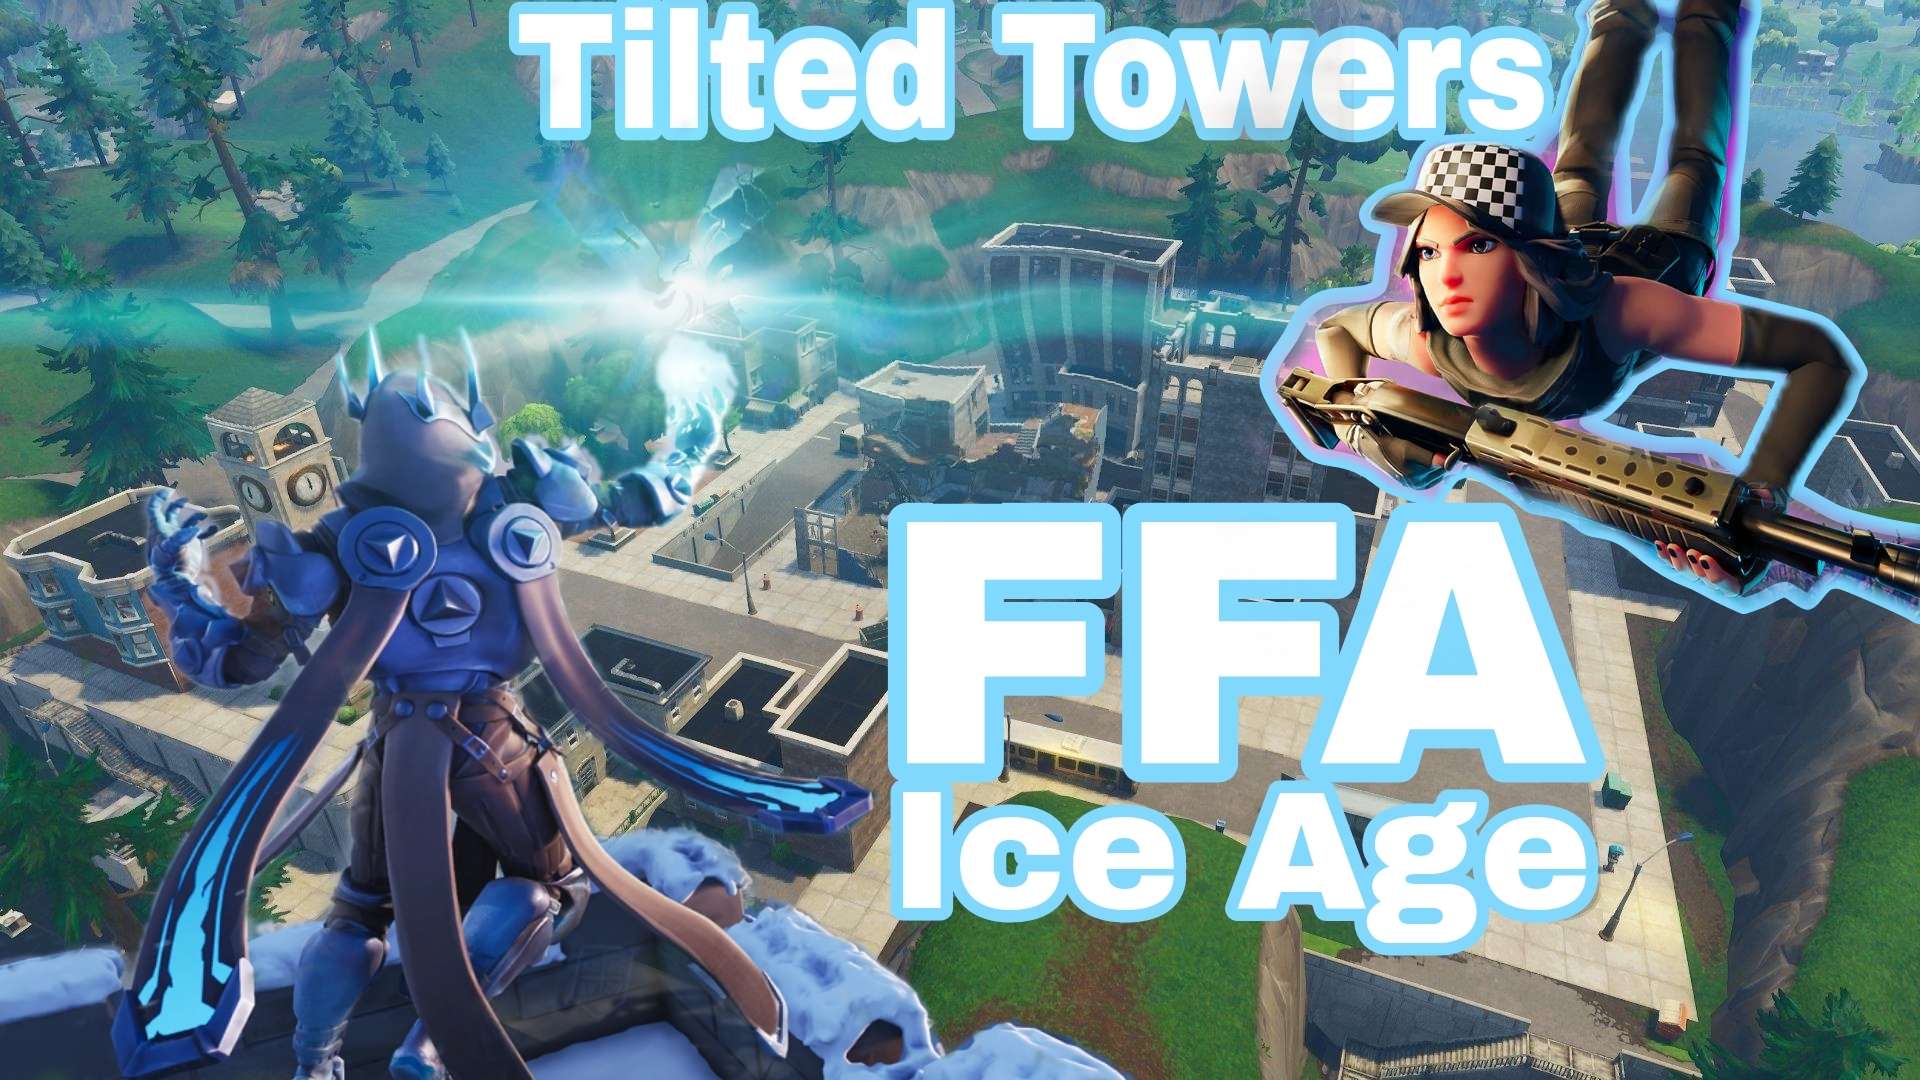 Tilted Towers FFA ICE AGE